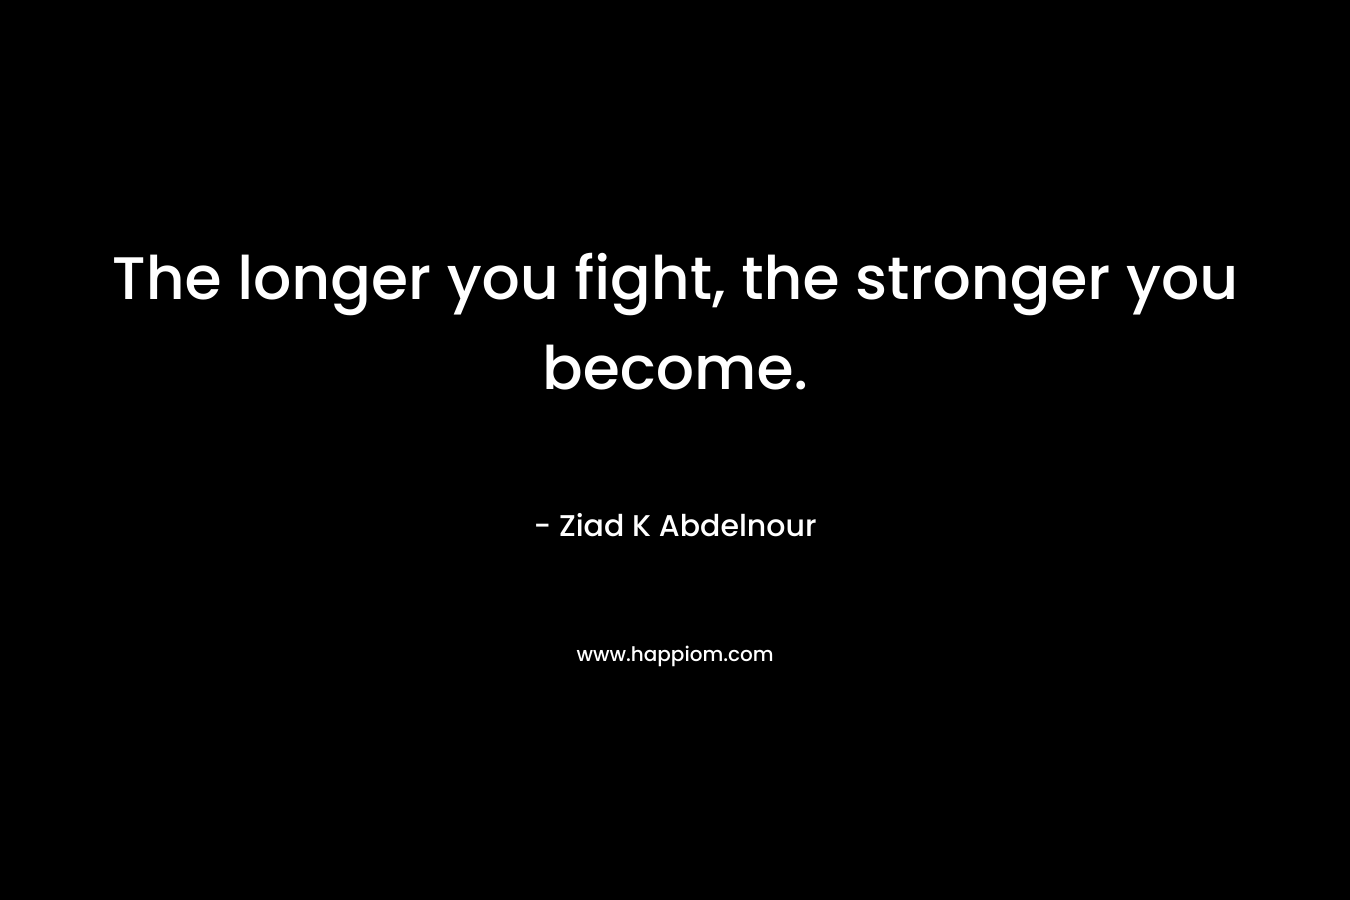 The longer you fight, the stronger you become. – Ziad K Abdelnour